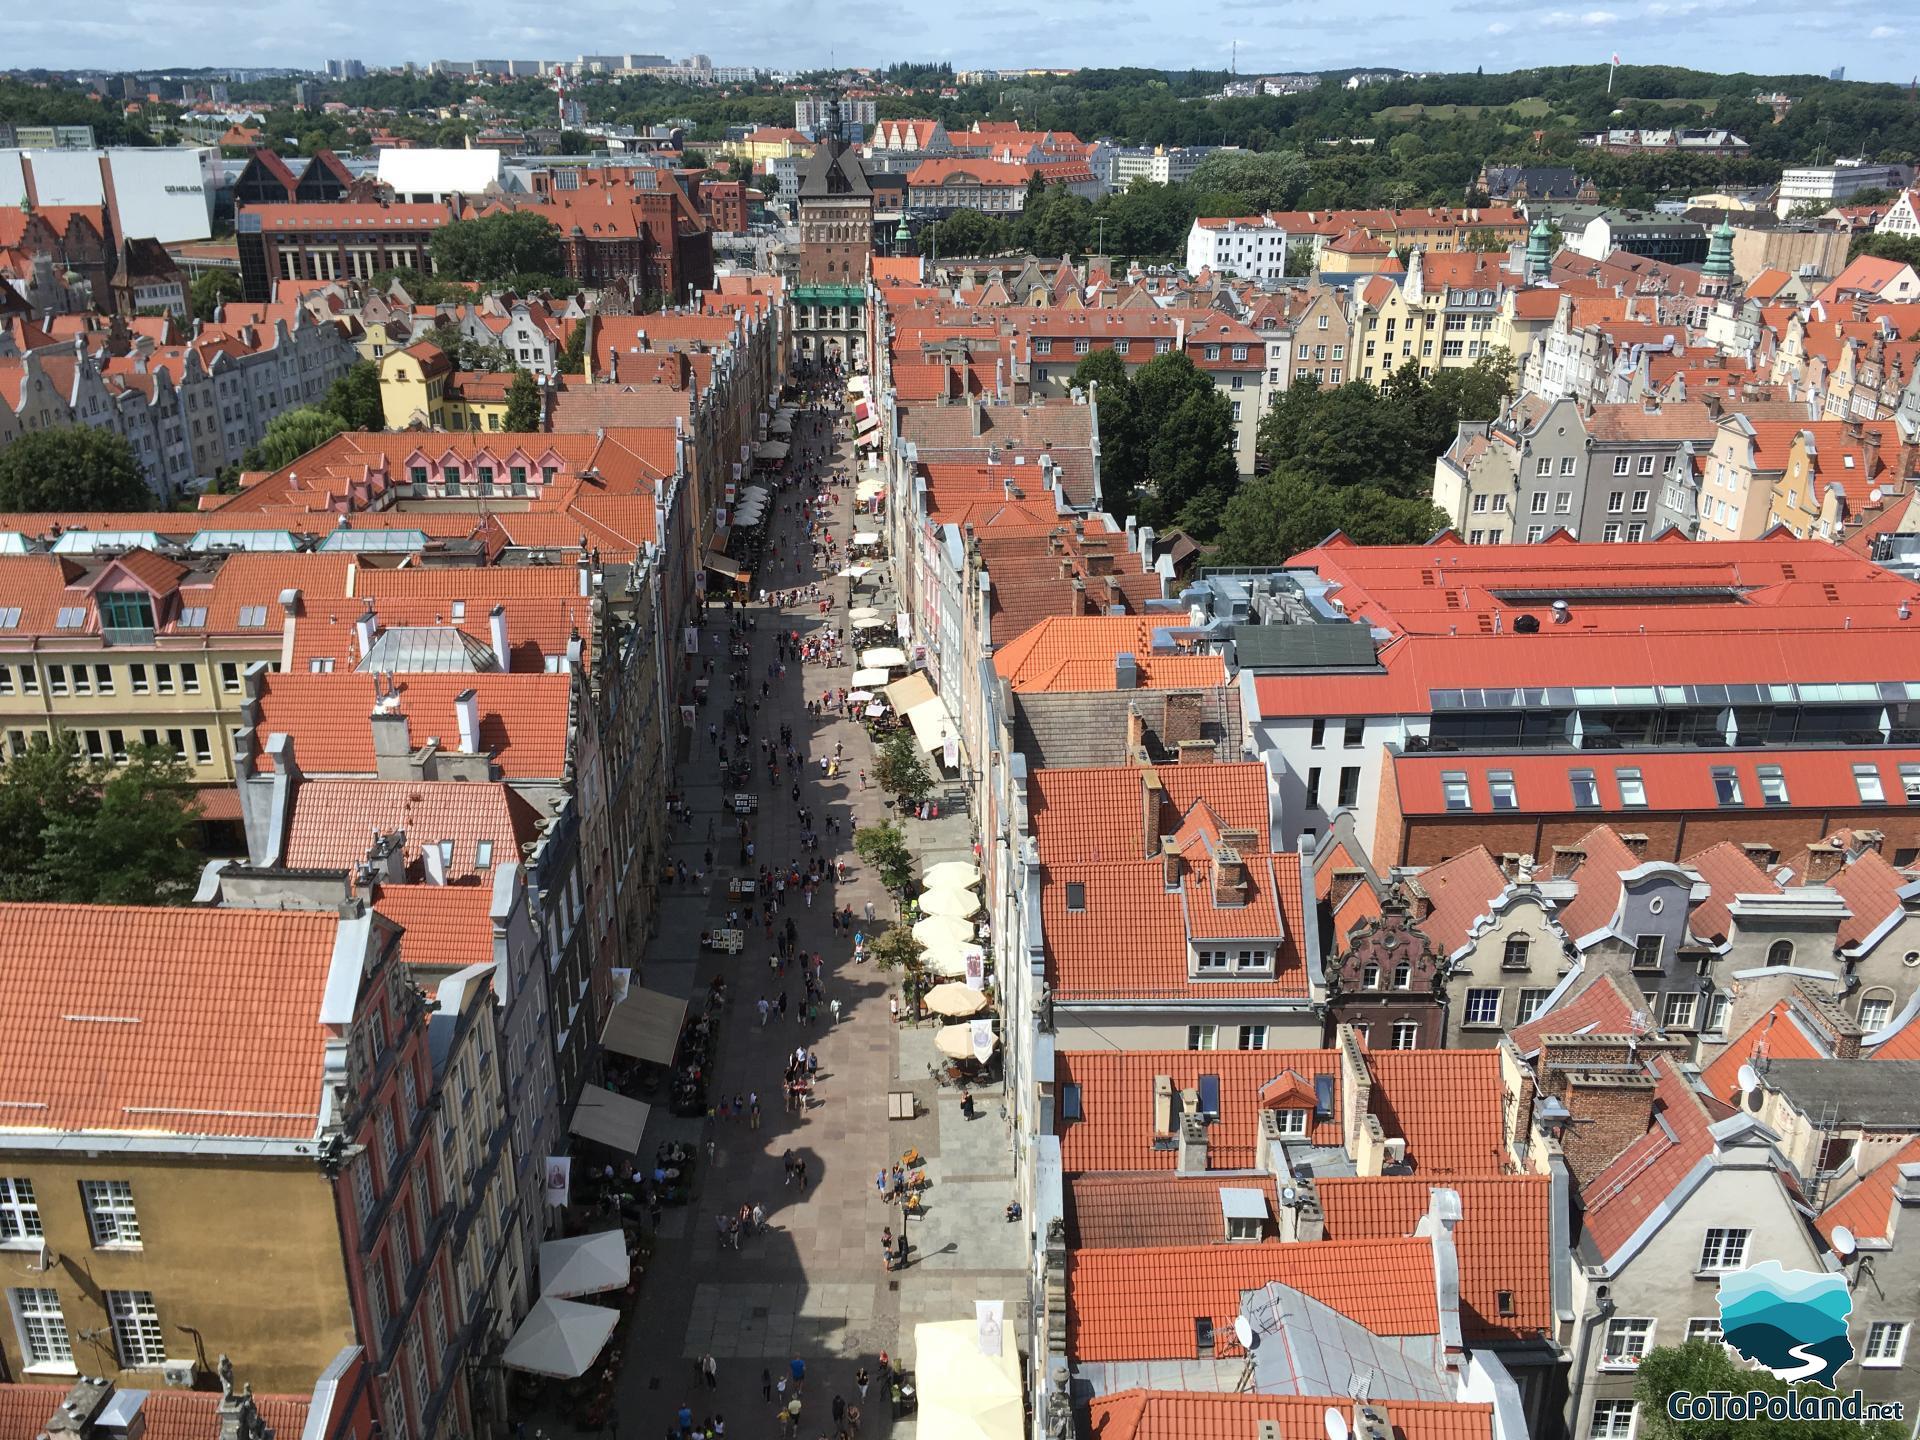 view from the town hall tower on the Old Market square